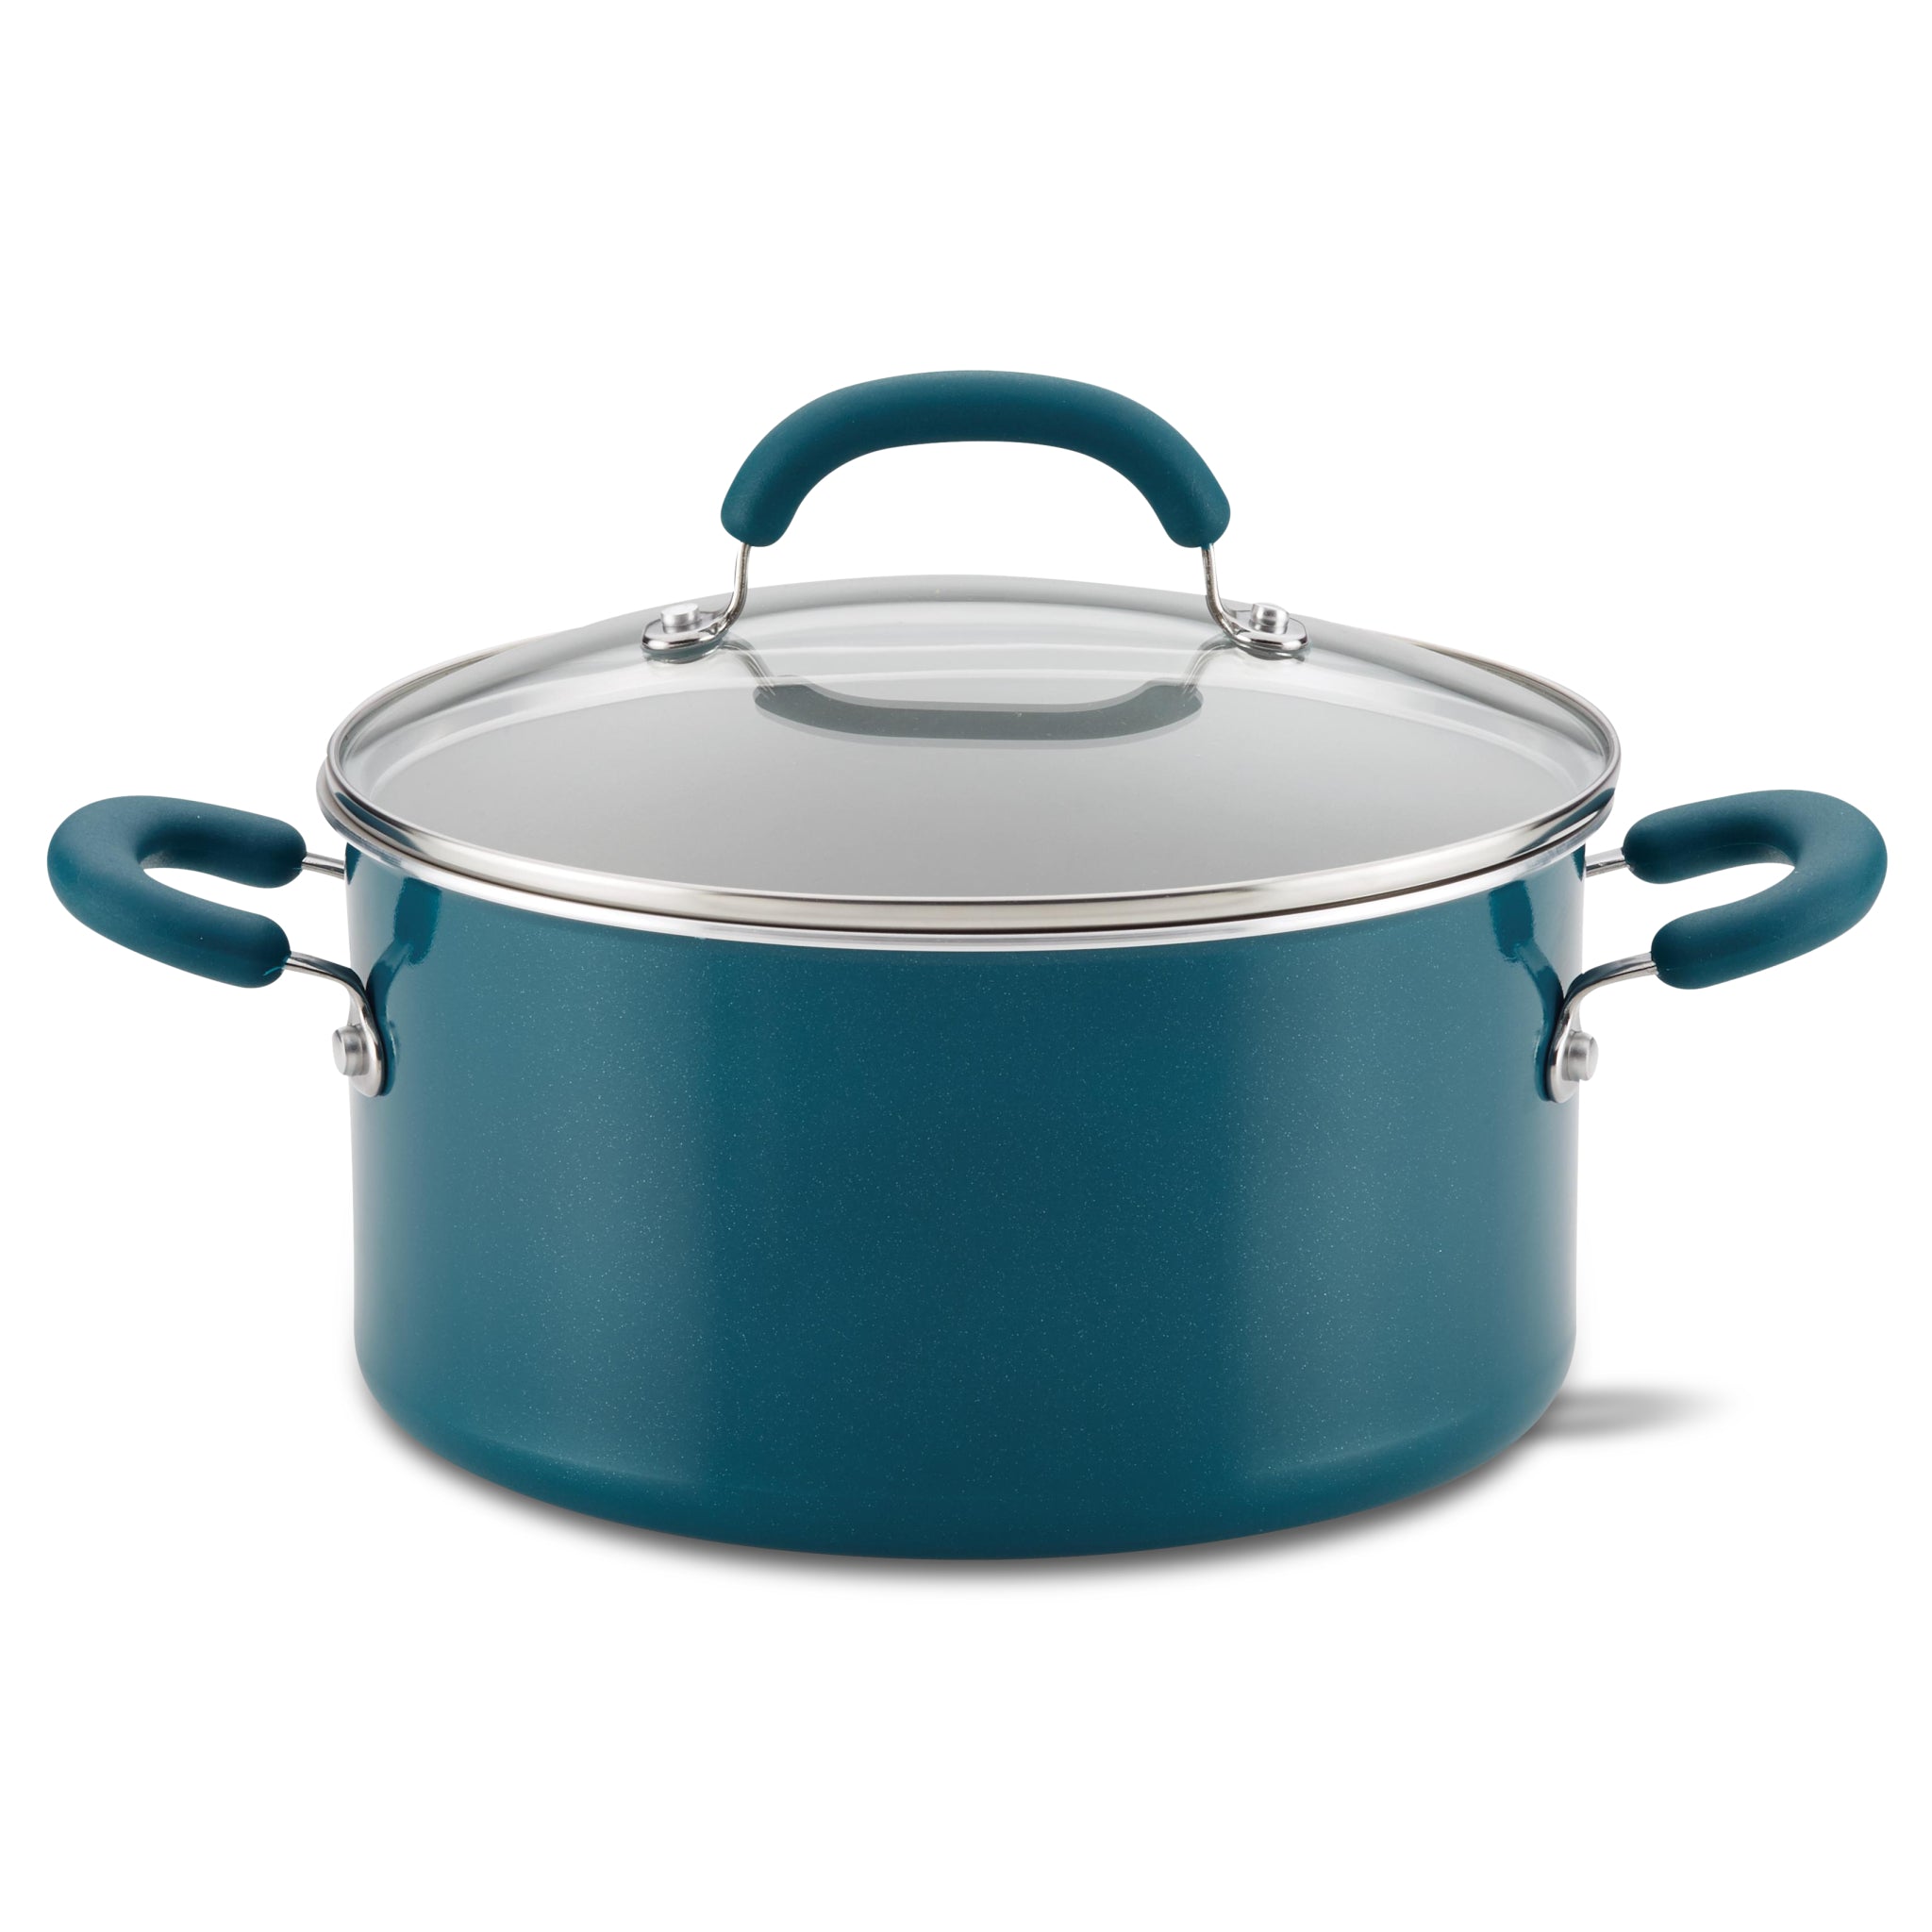  Rachael Ray Enamel on Steel Stock Pot/Stockpot with Lid, 12  Quart, Red Gradient: Home & Kitchen